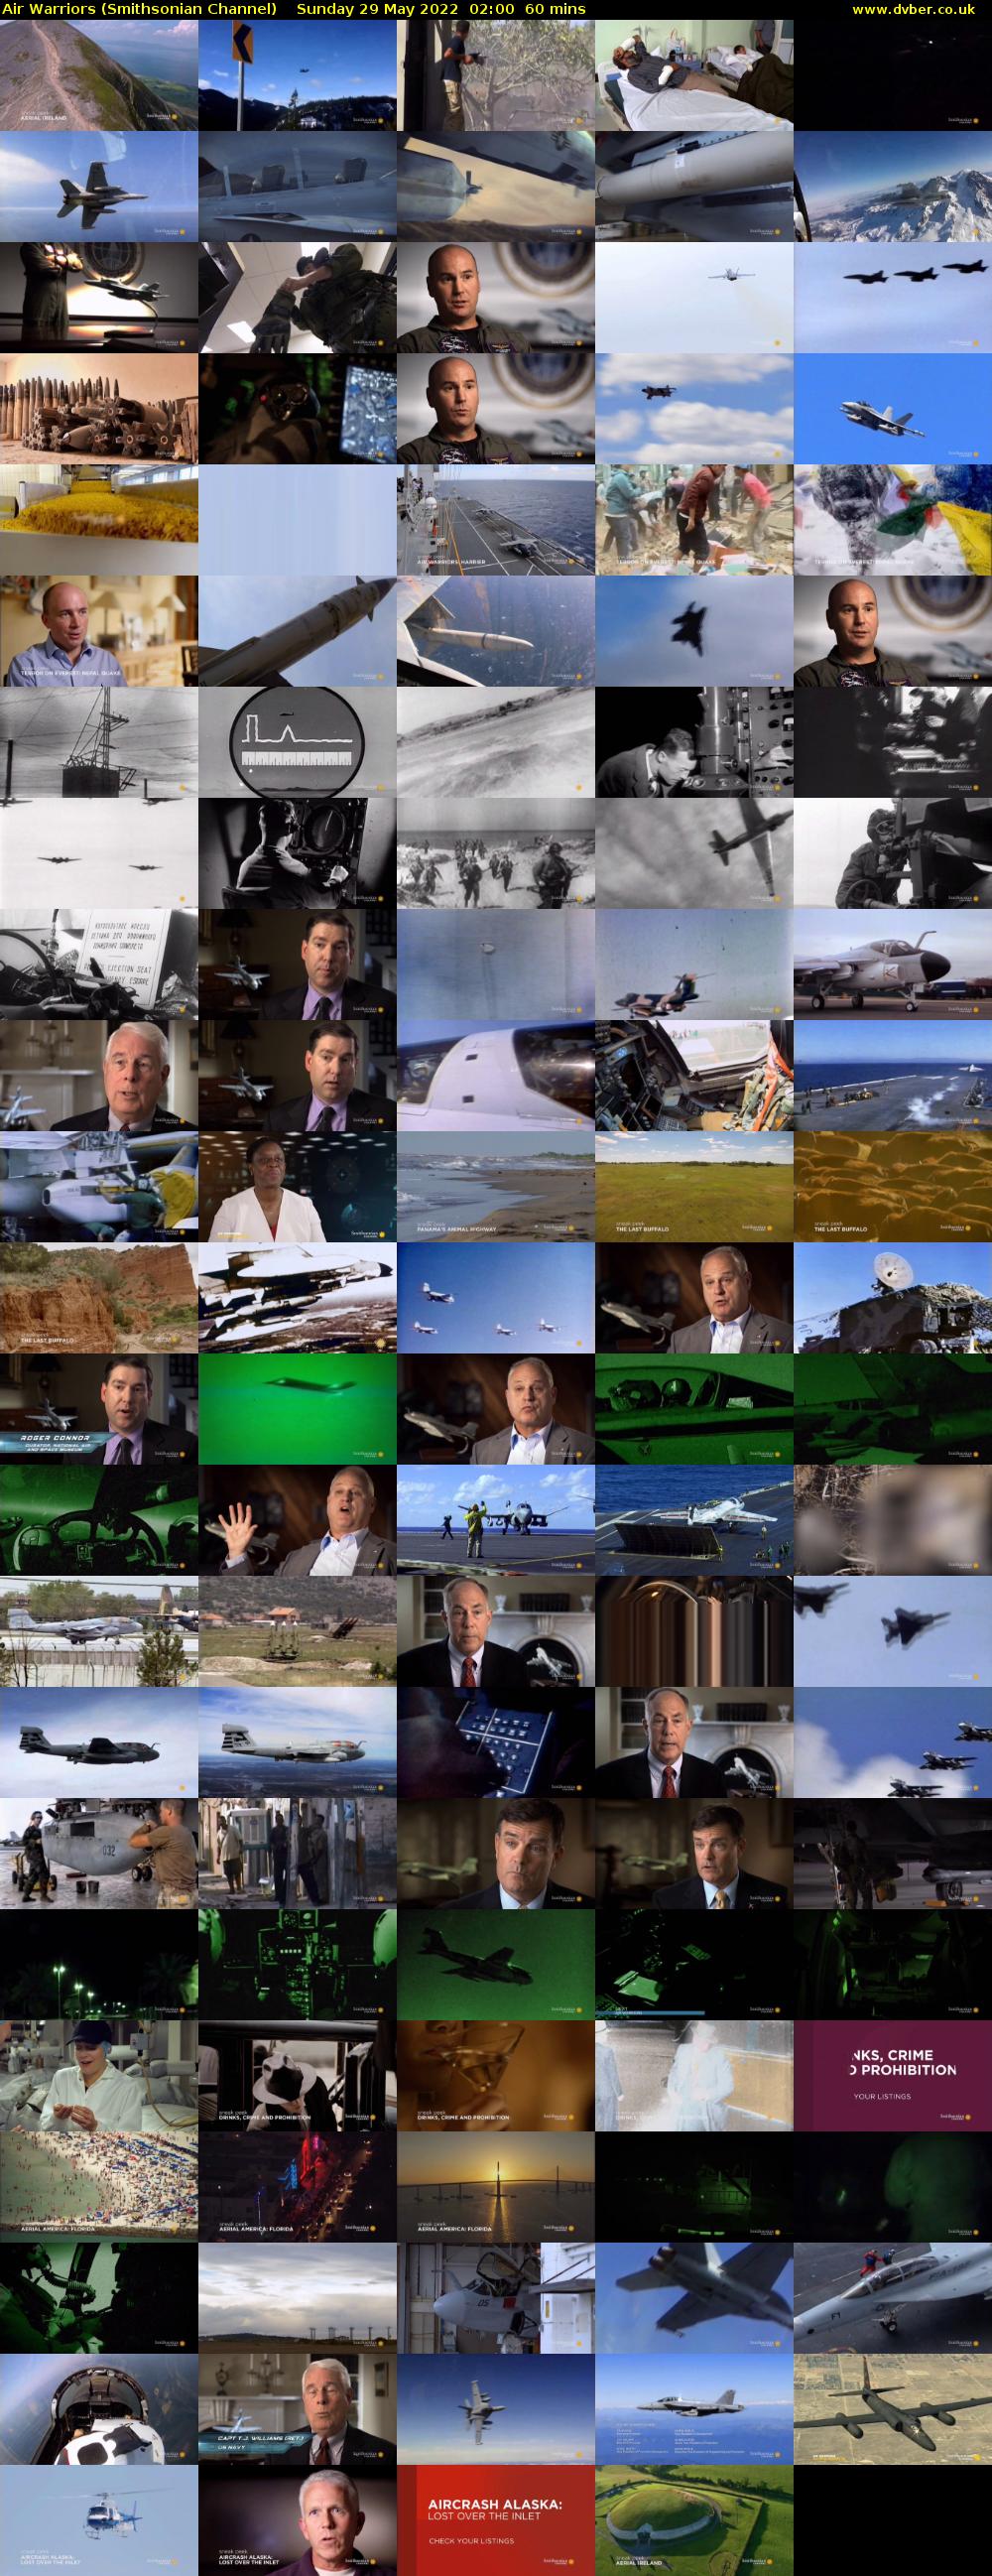 Air Warriors (Smithsonian Channel) Sunday 29 May 2022 02:00 - 03:00